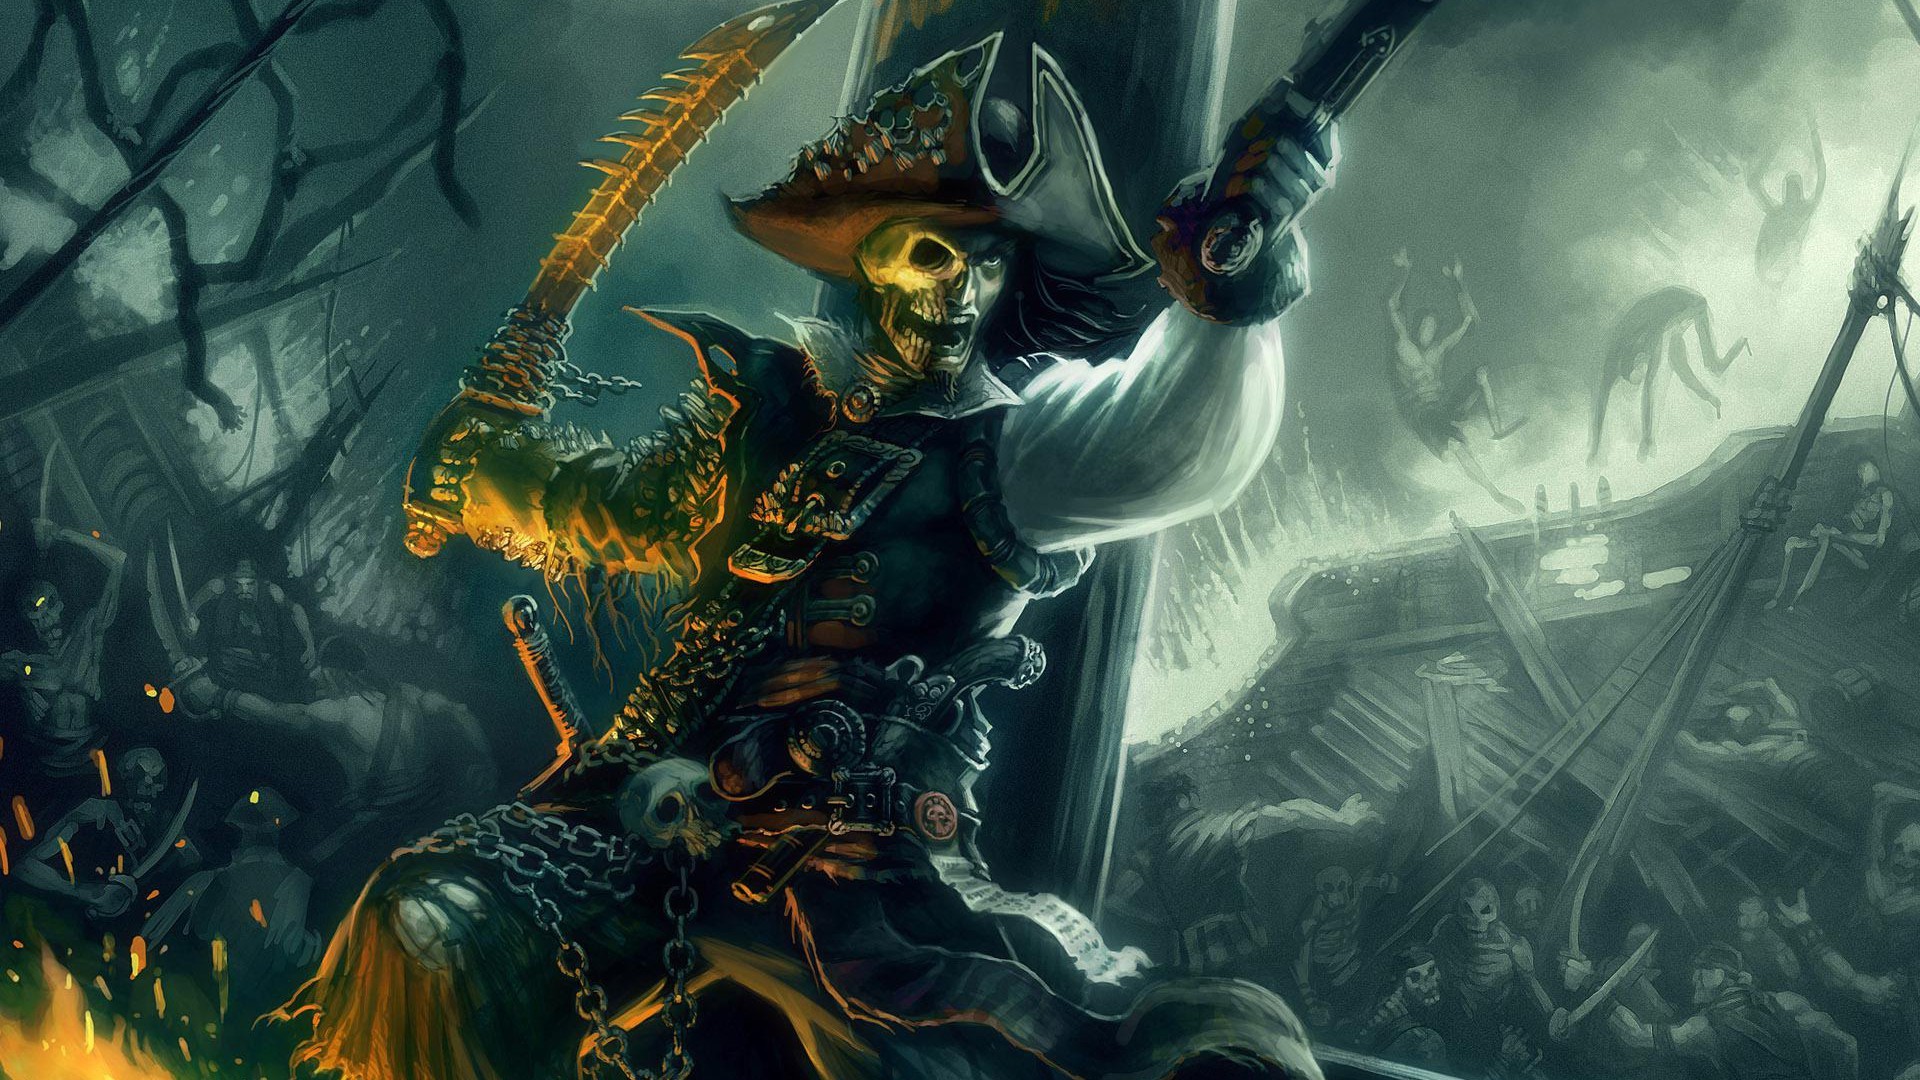 1920x1080, 95 Pirate Hd Wallpapers Backgrounds Wallpaper - Pirates Wallpaper Hd - HD Wallpaper 